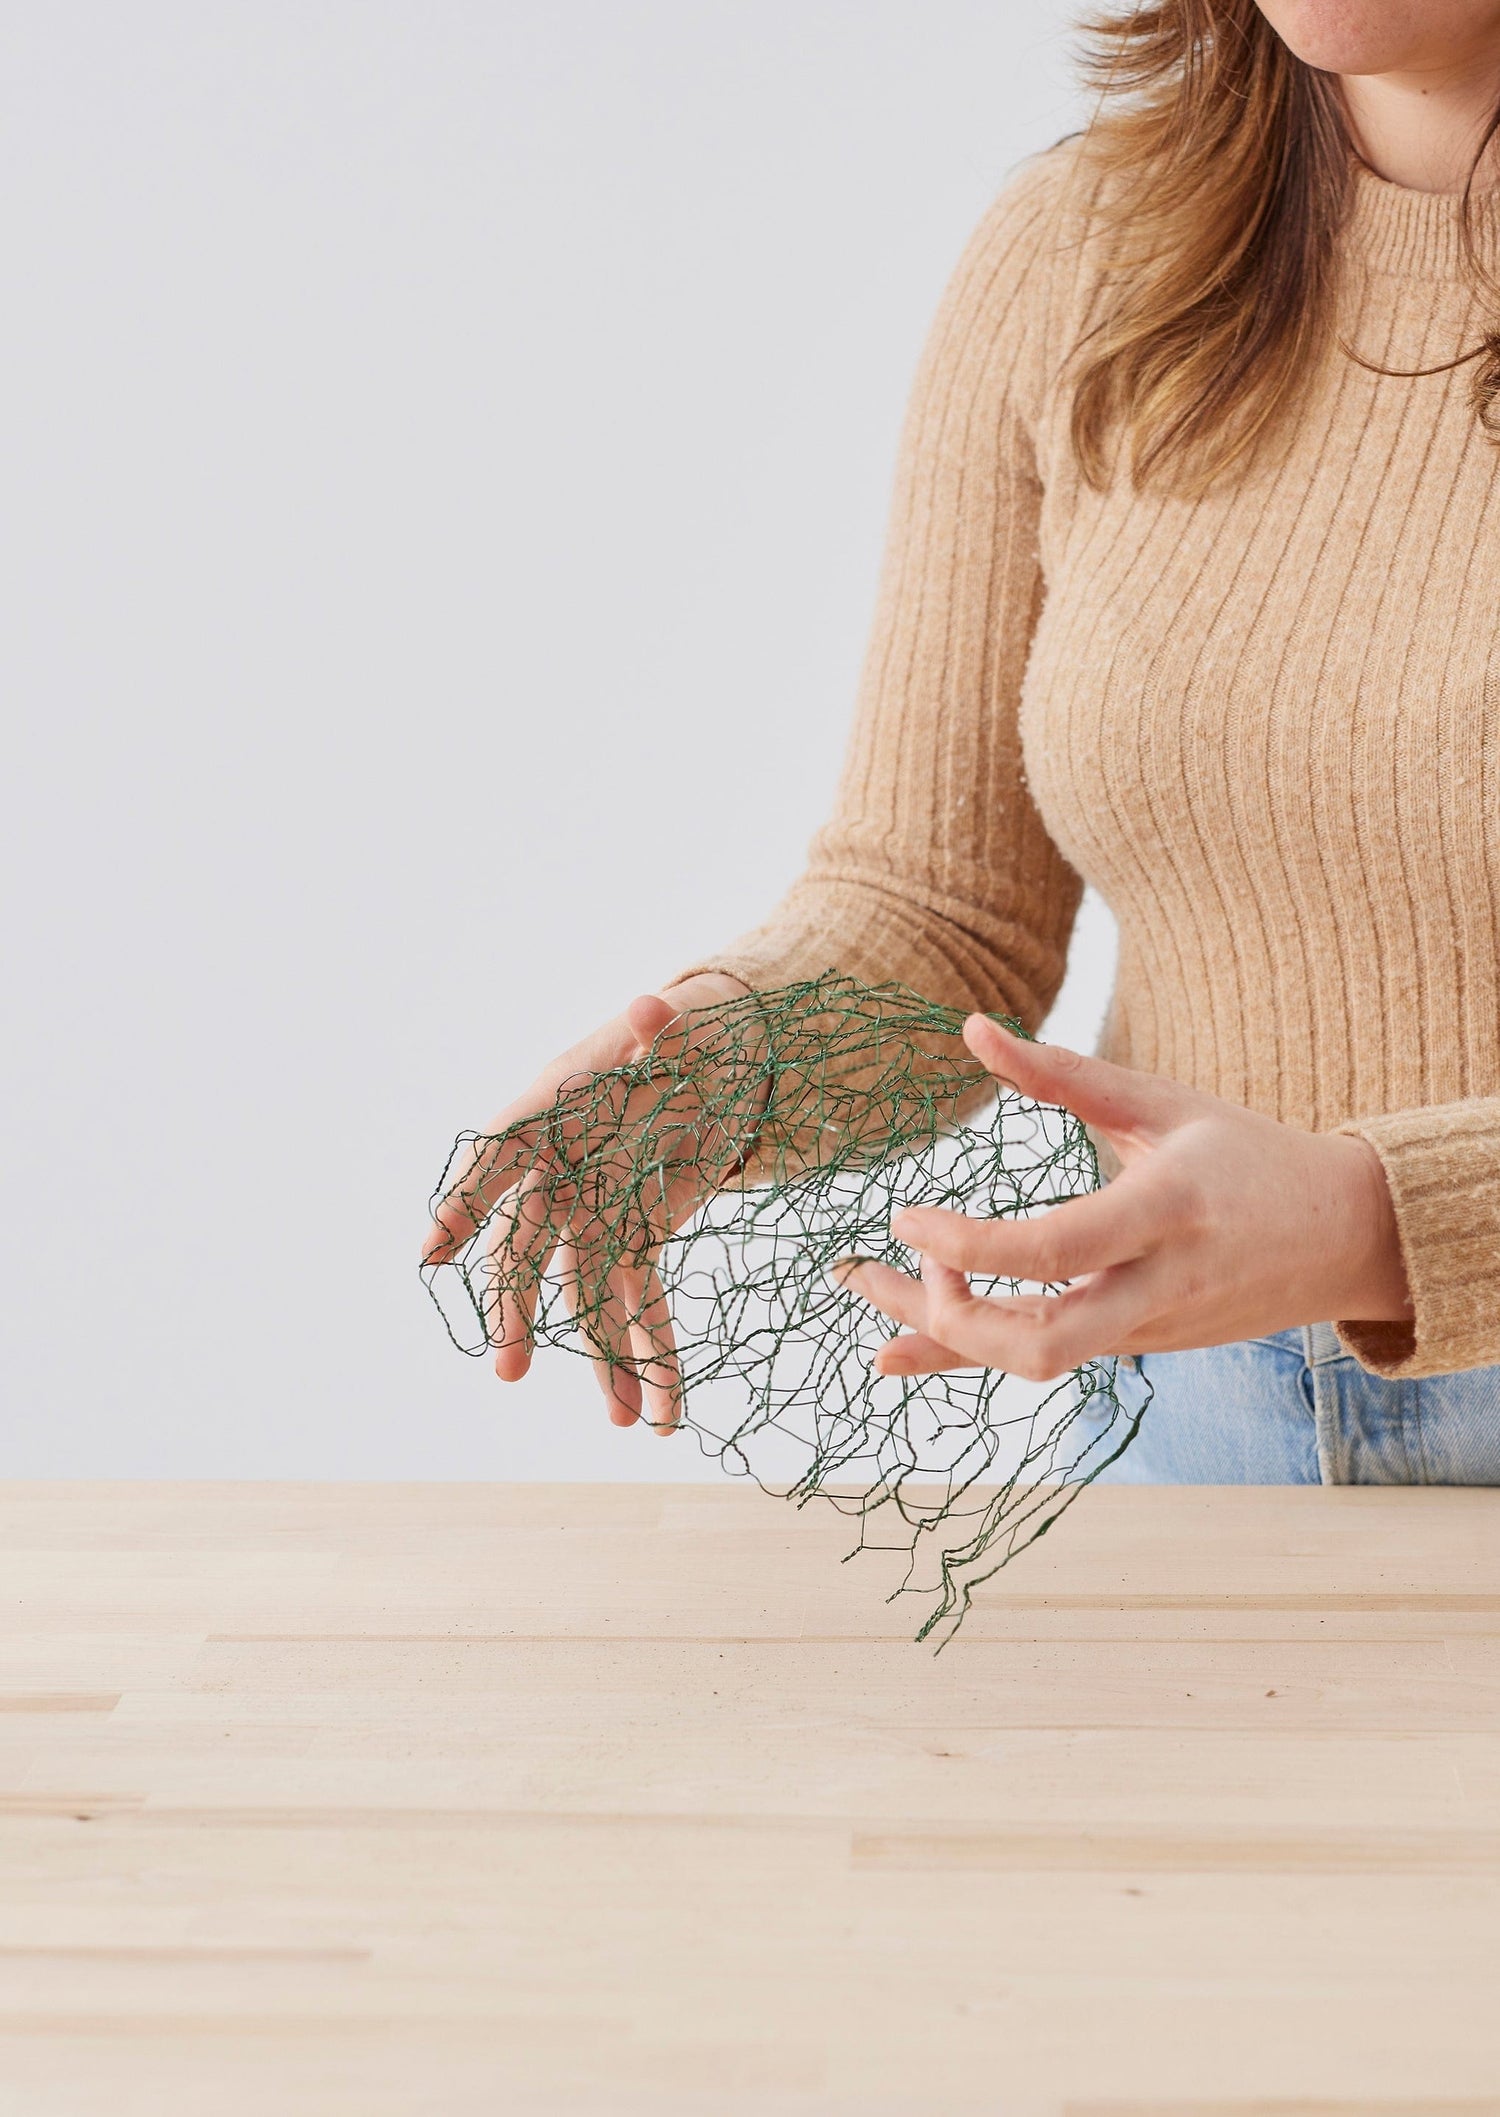 chicken wire for foam-free floral arranging